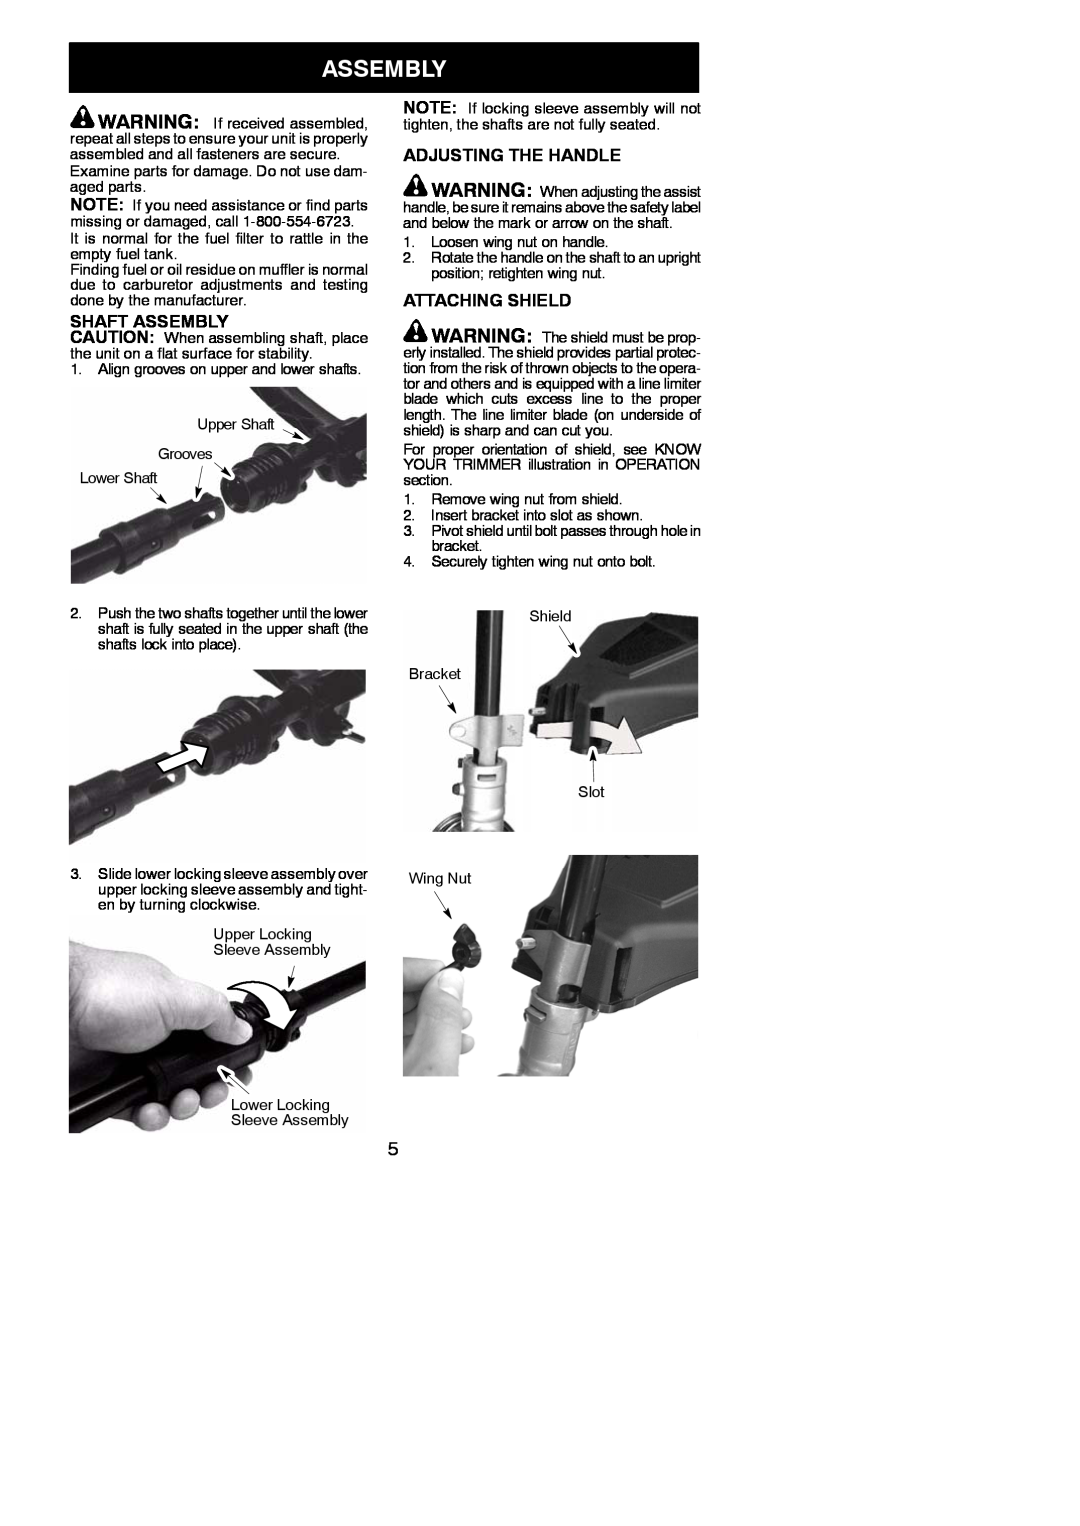 Weed Eater 952711940 instruction manual Shaft Assembly, Adjusting The Handle, Attaching Shield 